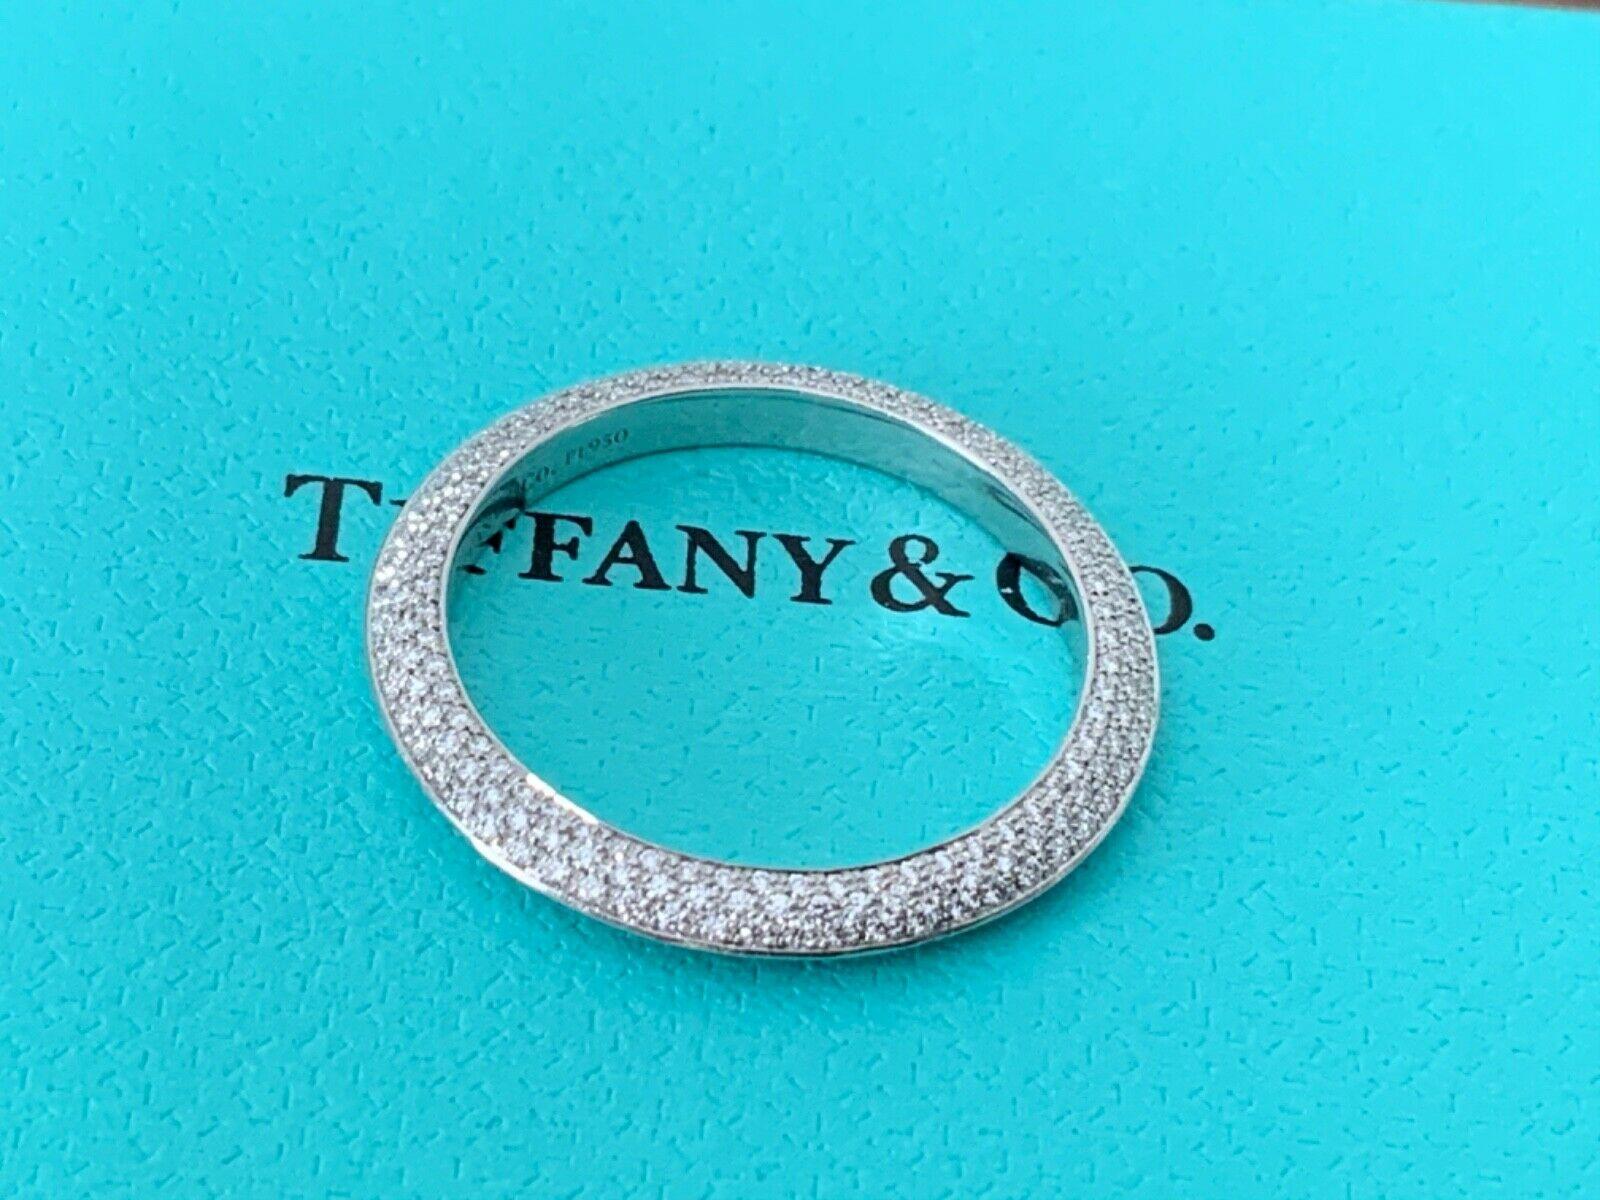 Tiffany & Co. Platinum Pave Diamond Wedding Band Ring with Papers 2019 For Sale 2